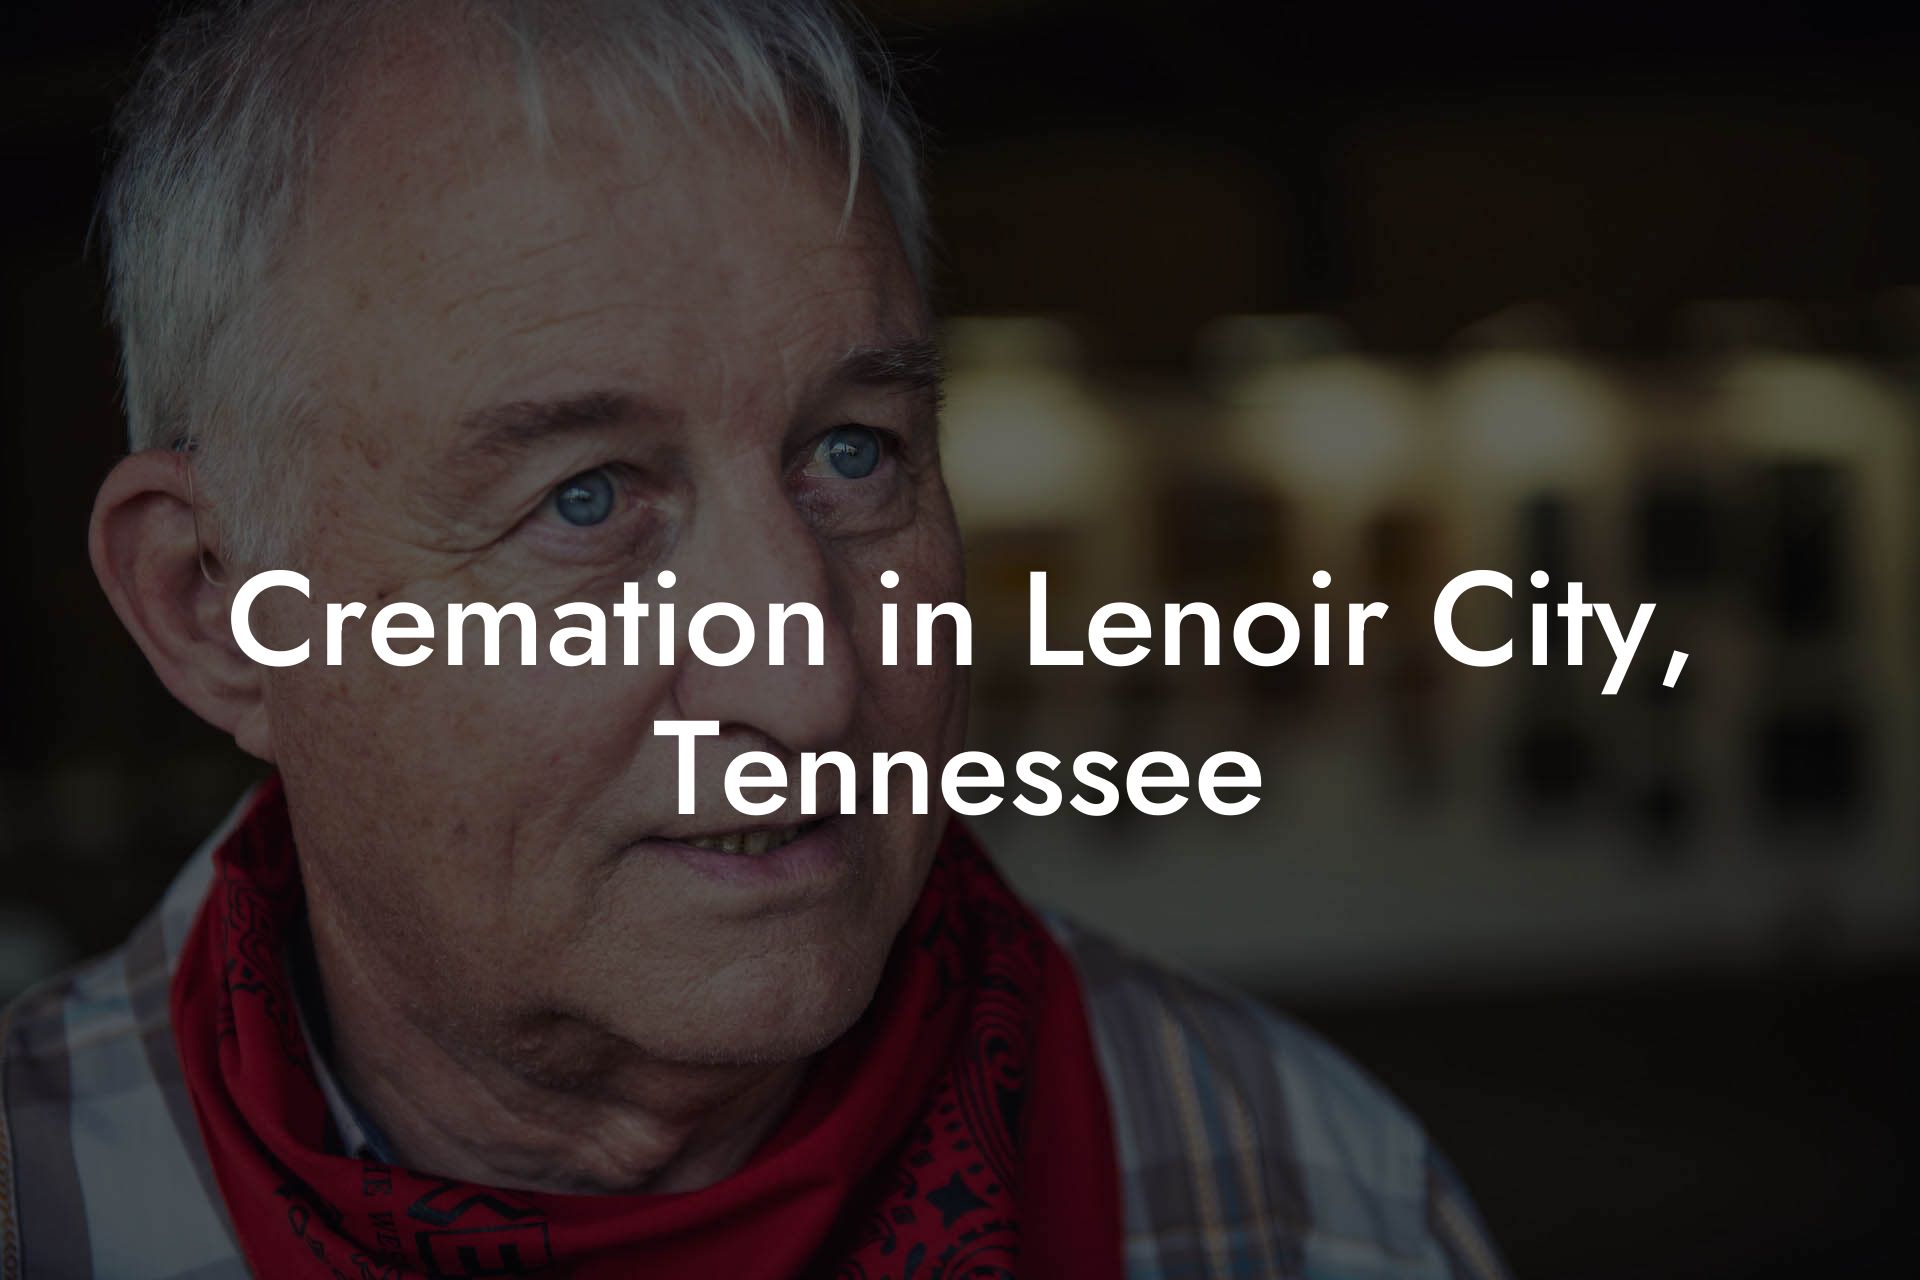 Cremation in Lenoir City, Tennessee